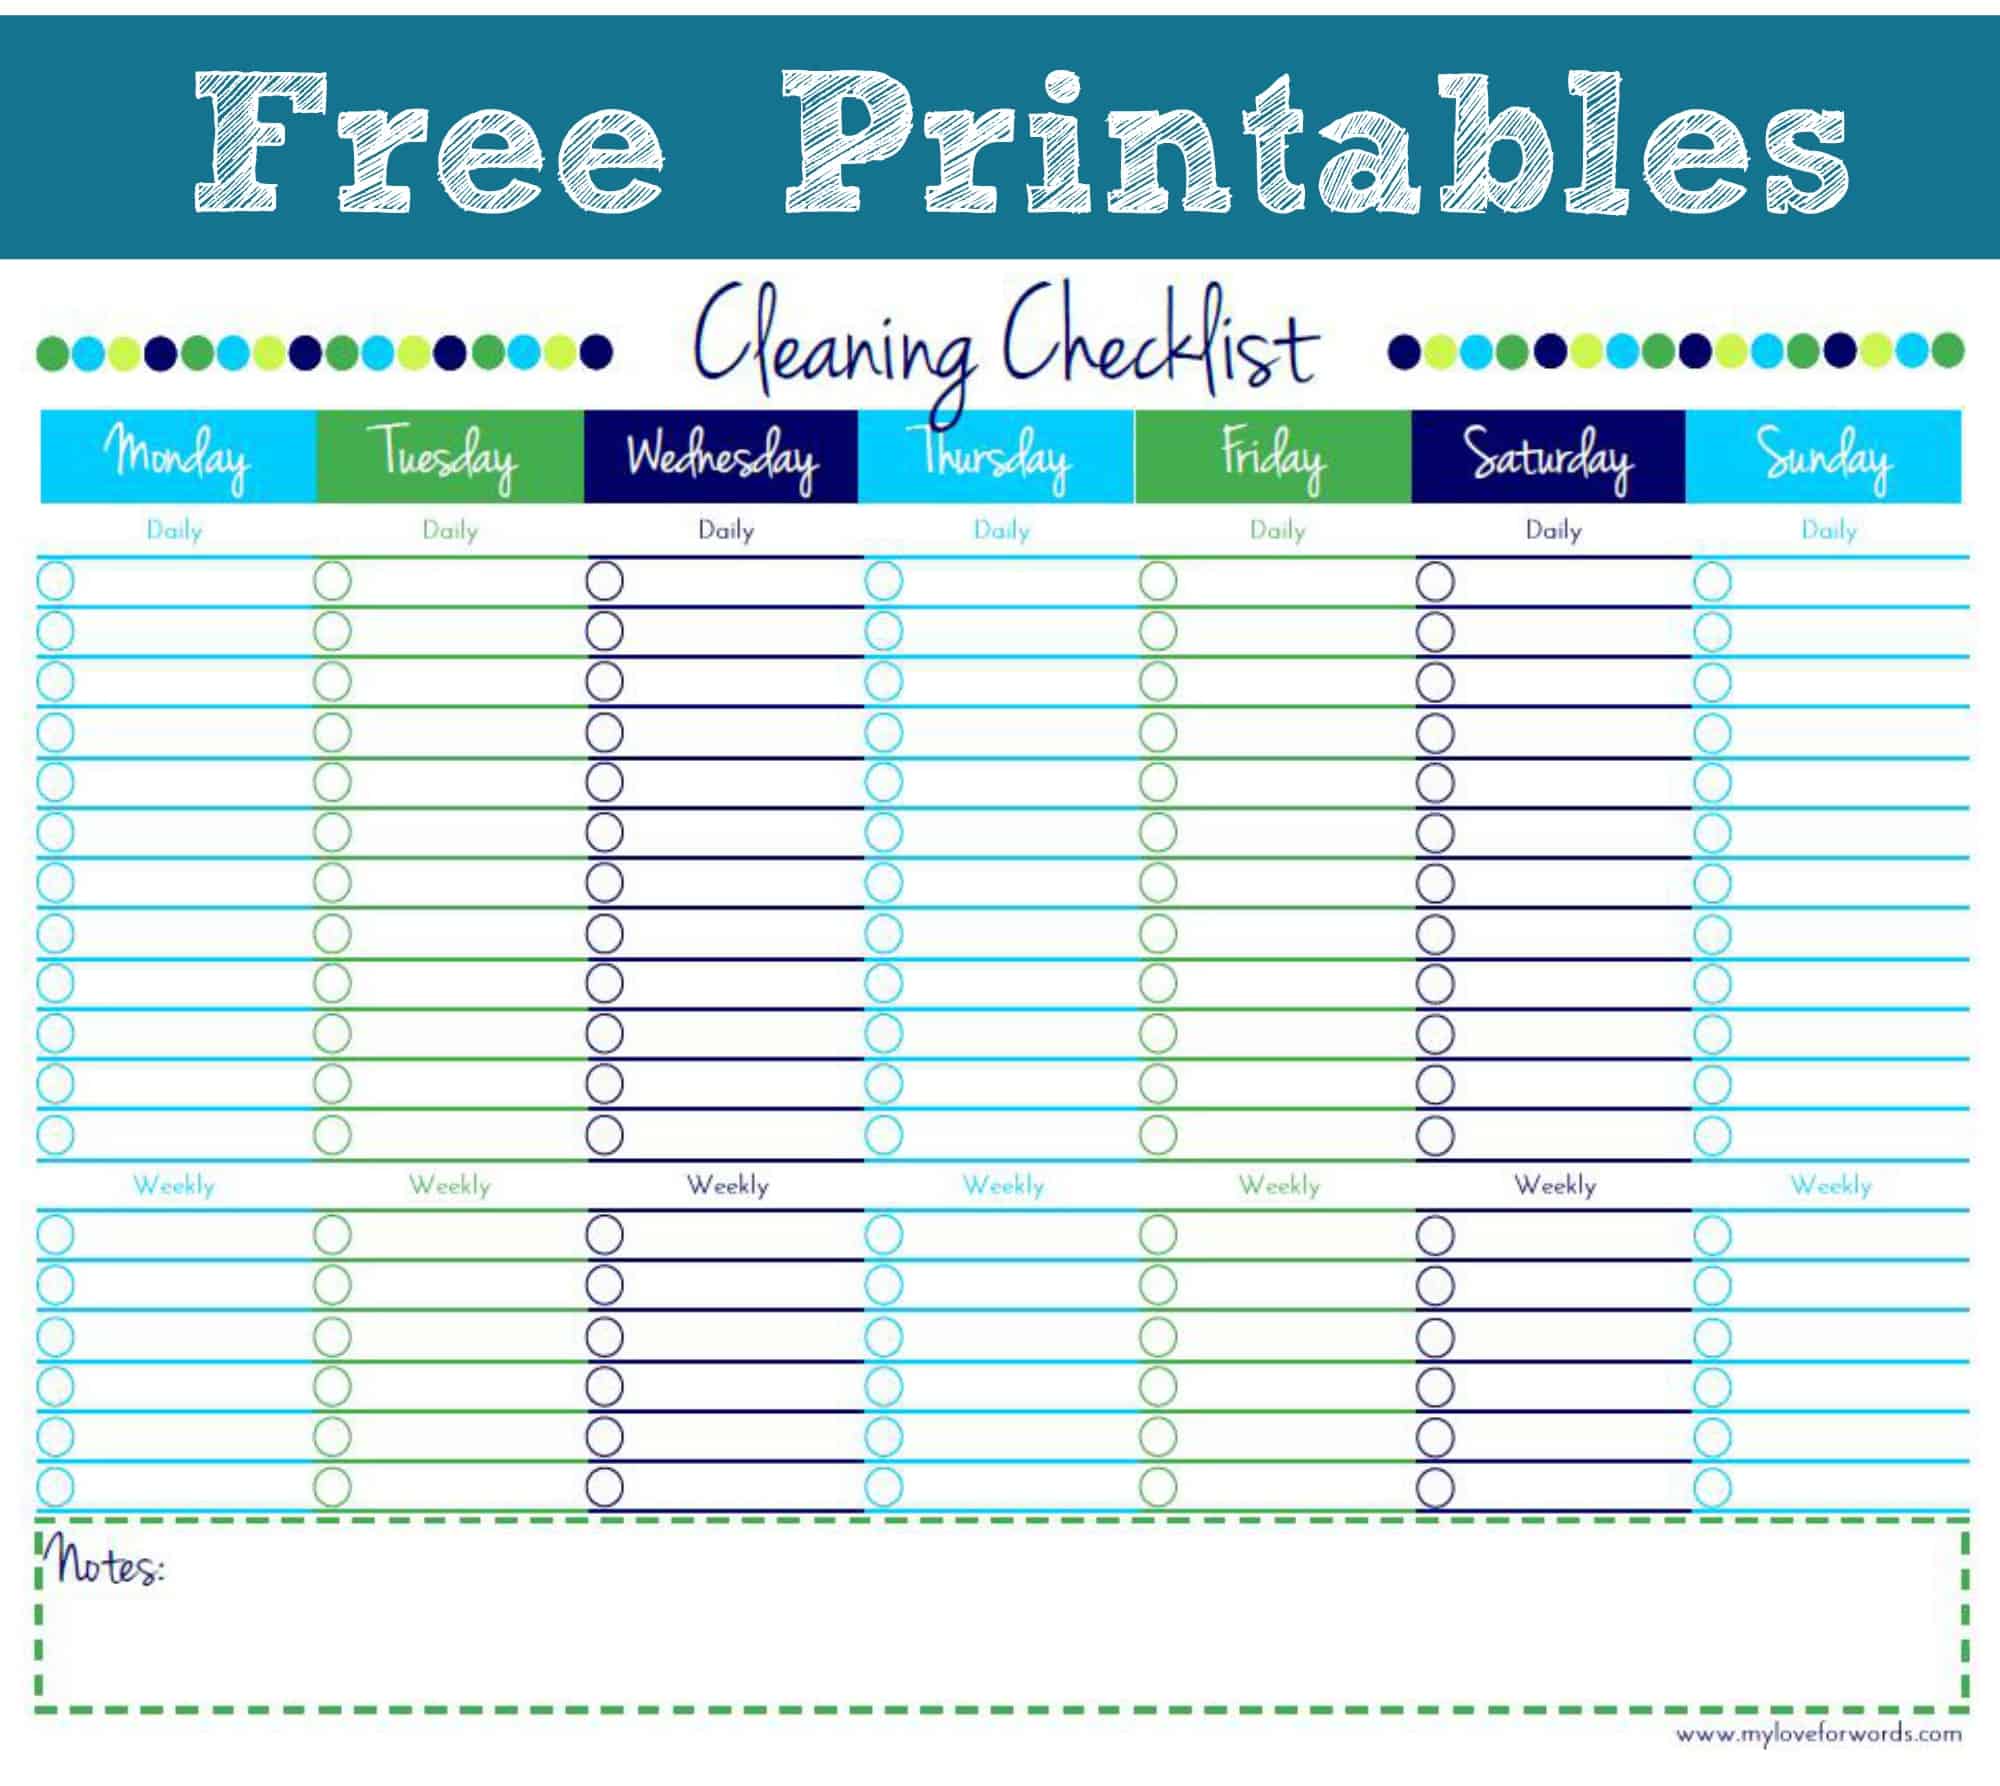 Cleaning Checklist Free Printable,Goring George Michael